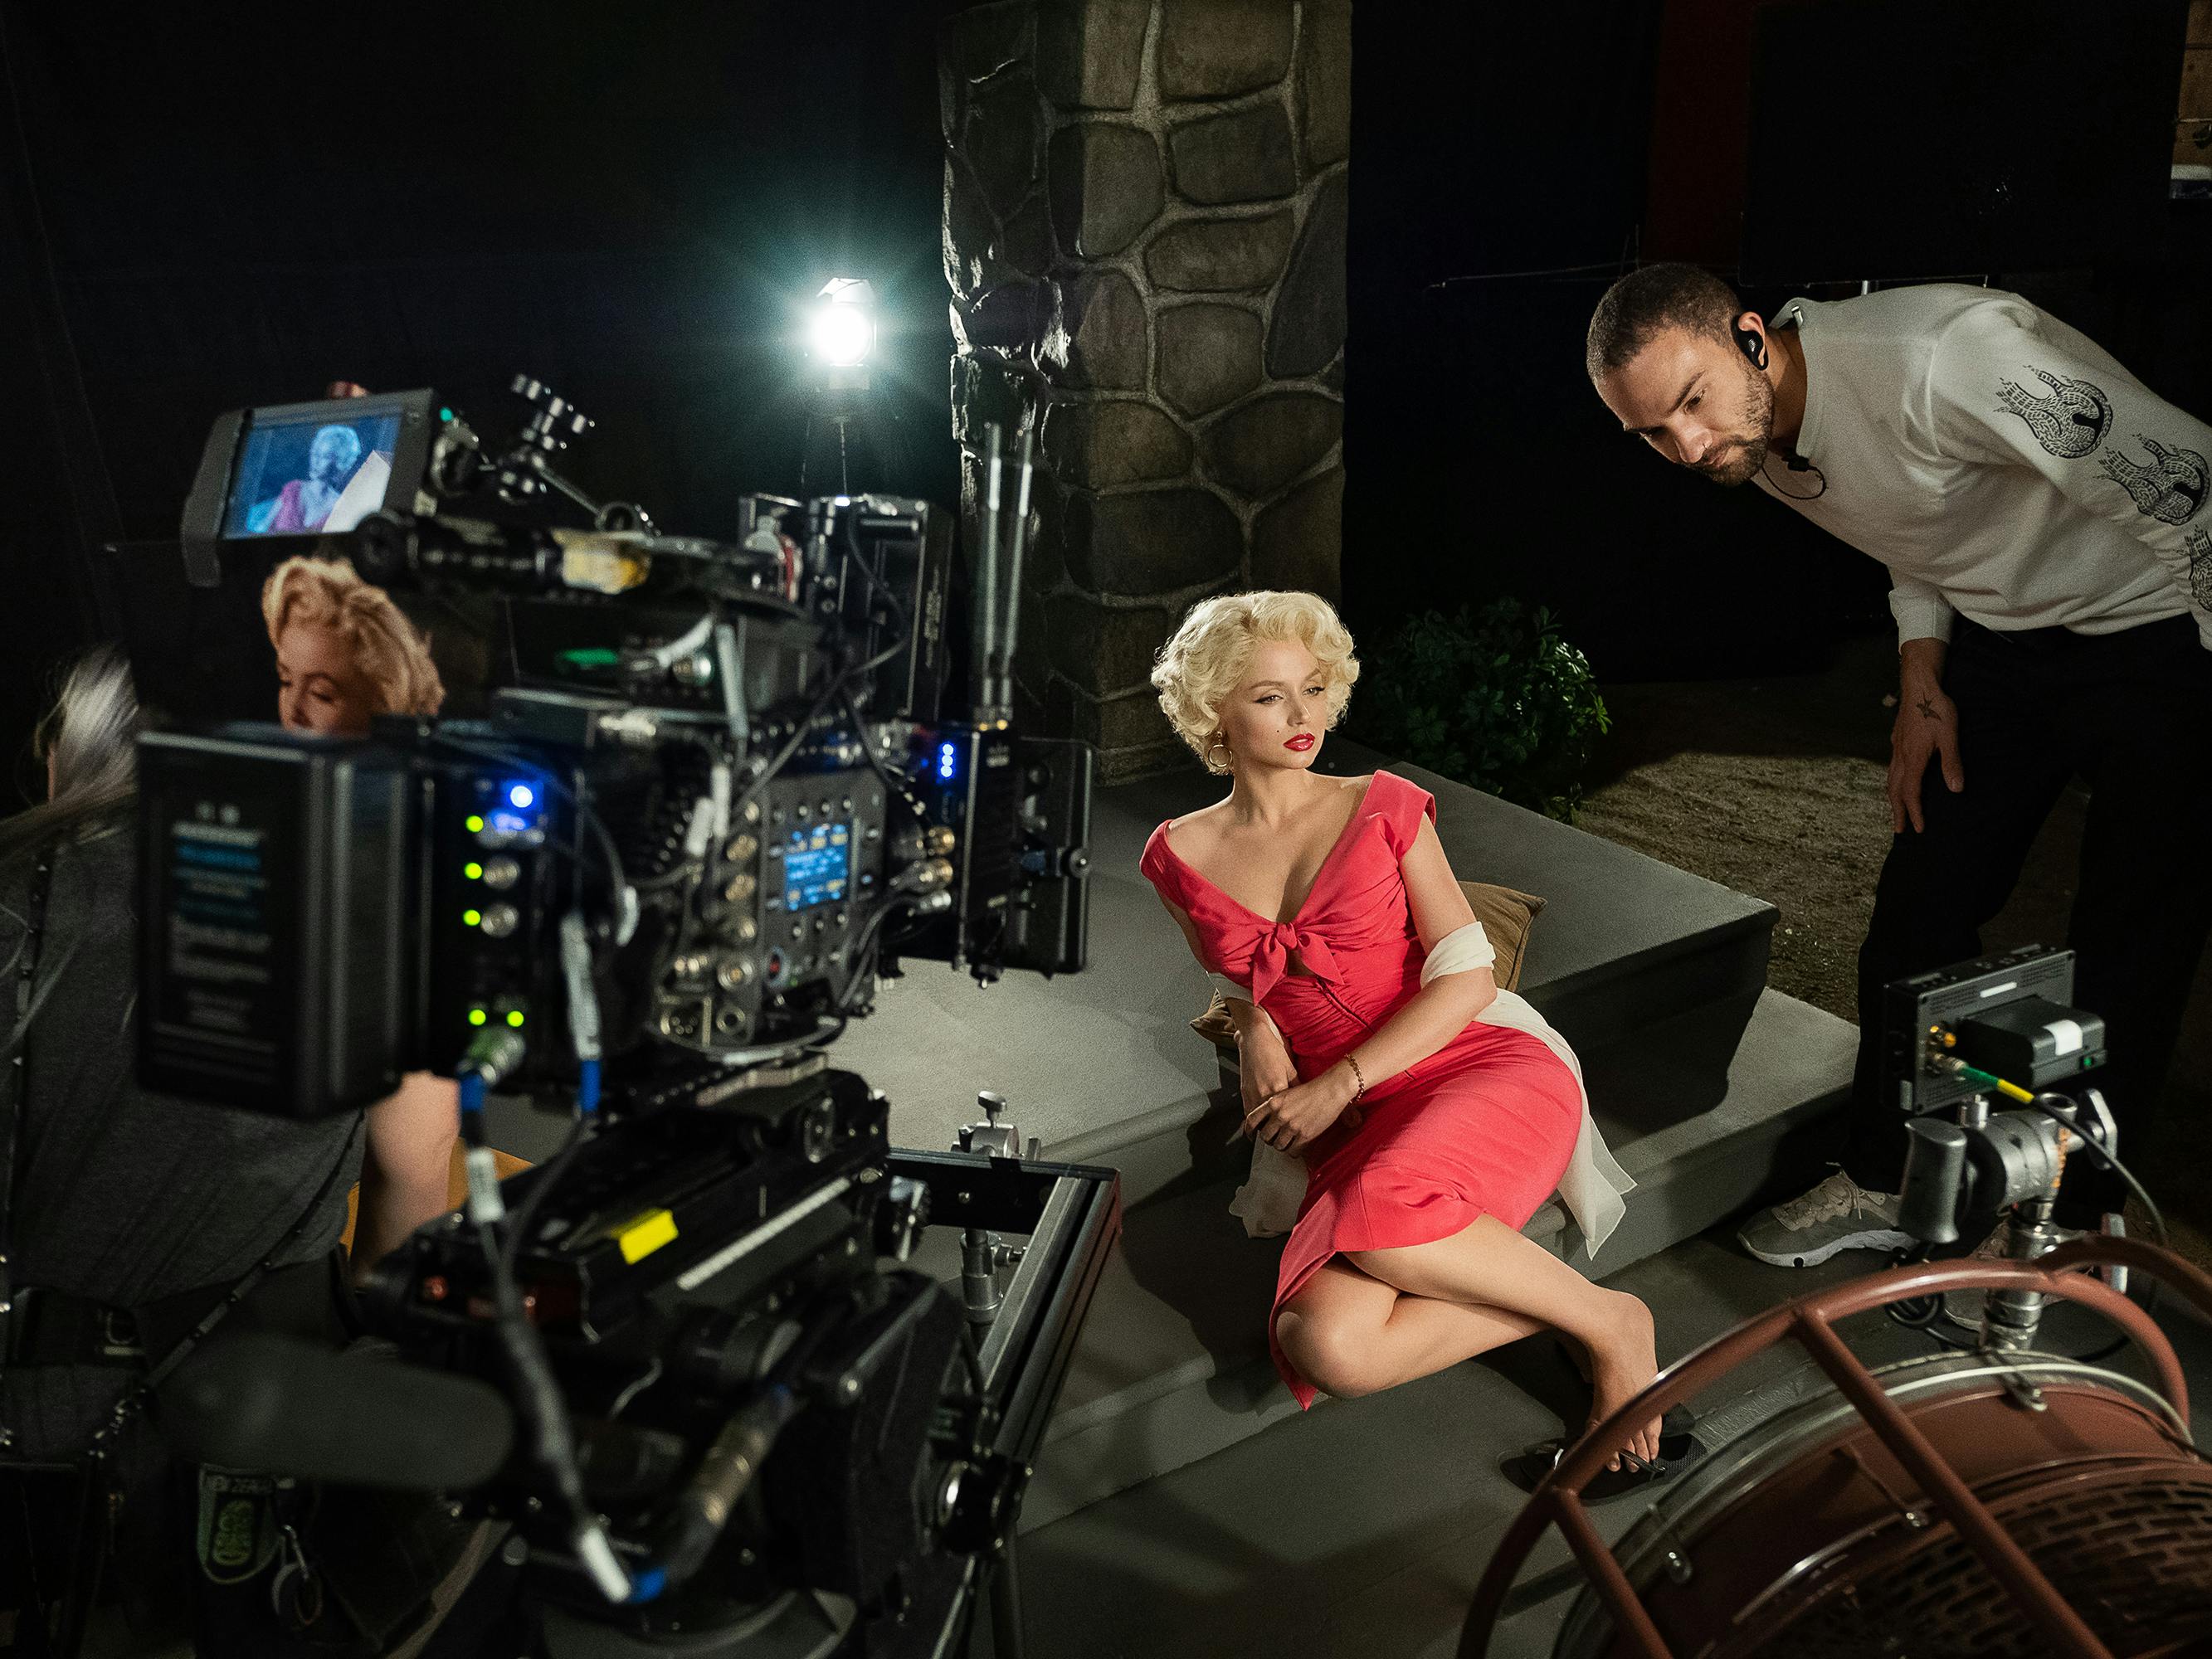 Ana de Armas behind the scenes of Blonde. She wears a v-necked red dress.